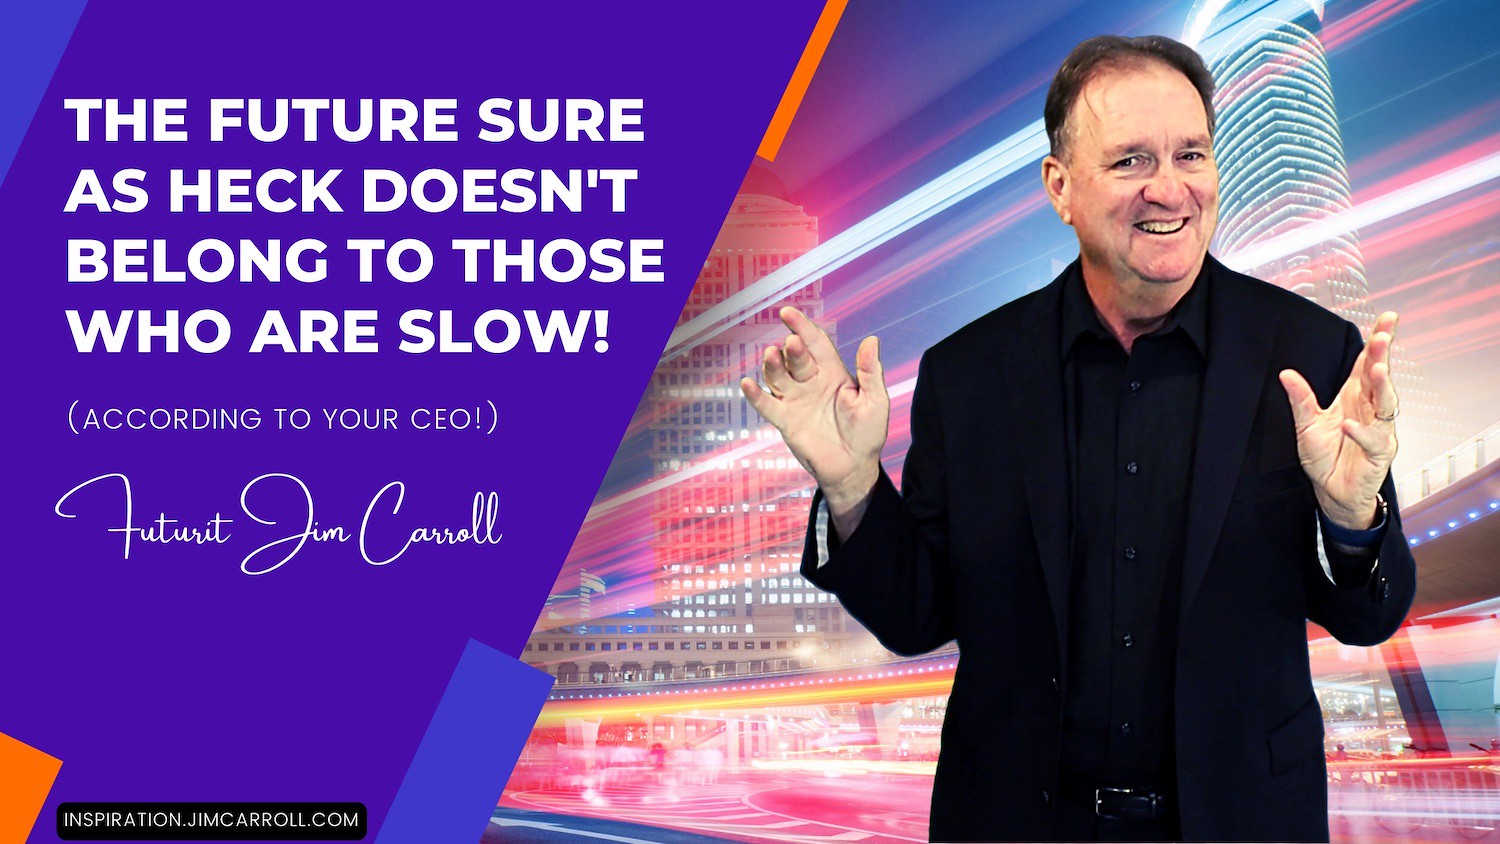 "The future sure as heck doesn't belong to those who are slow!" - Futurist Jim Carroll